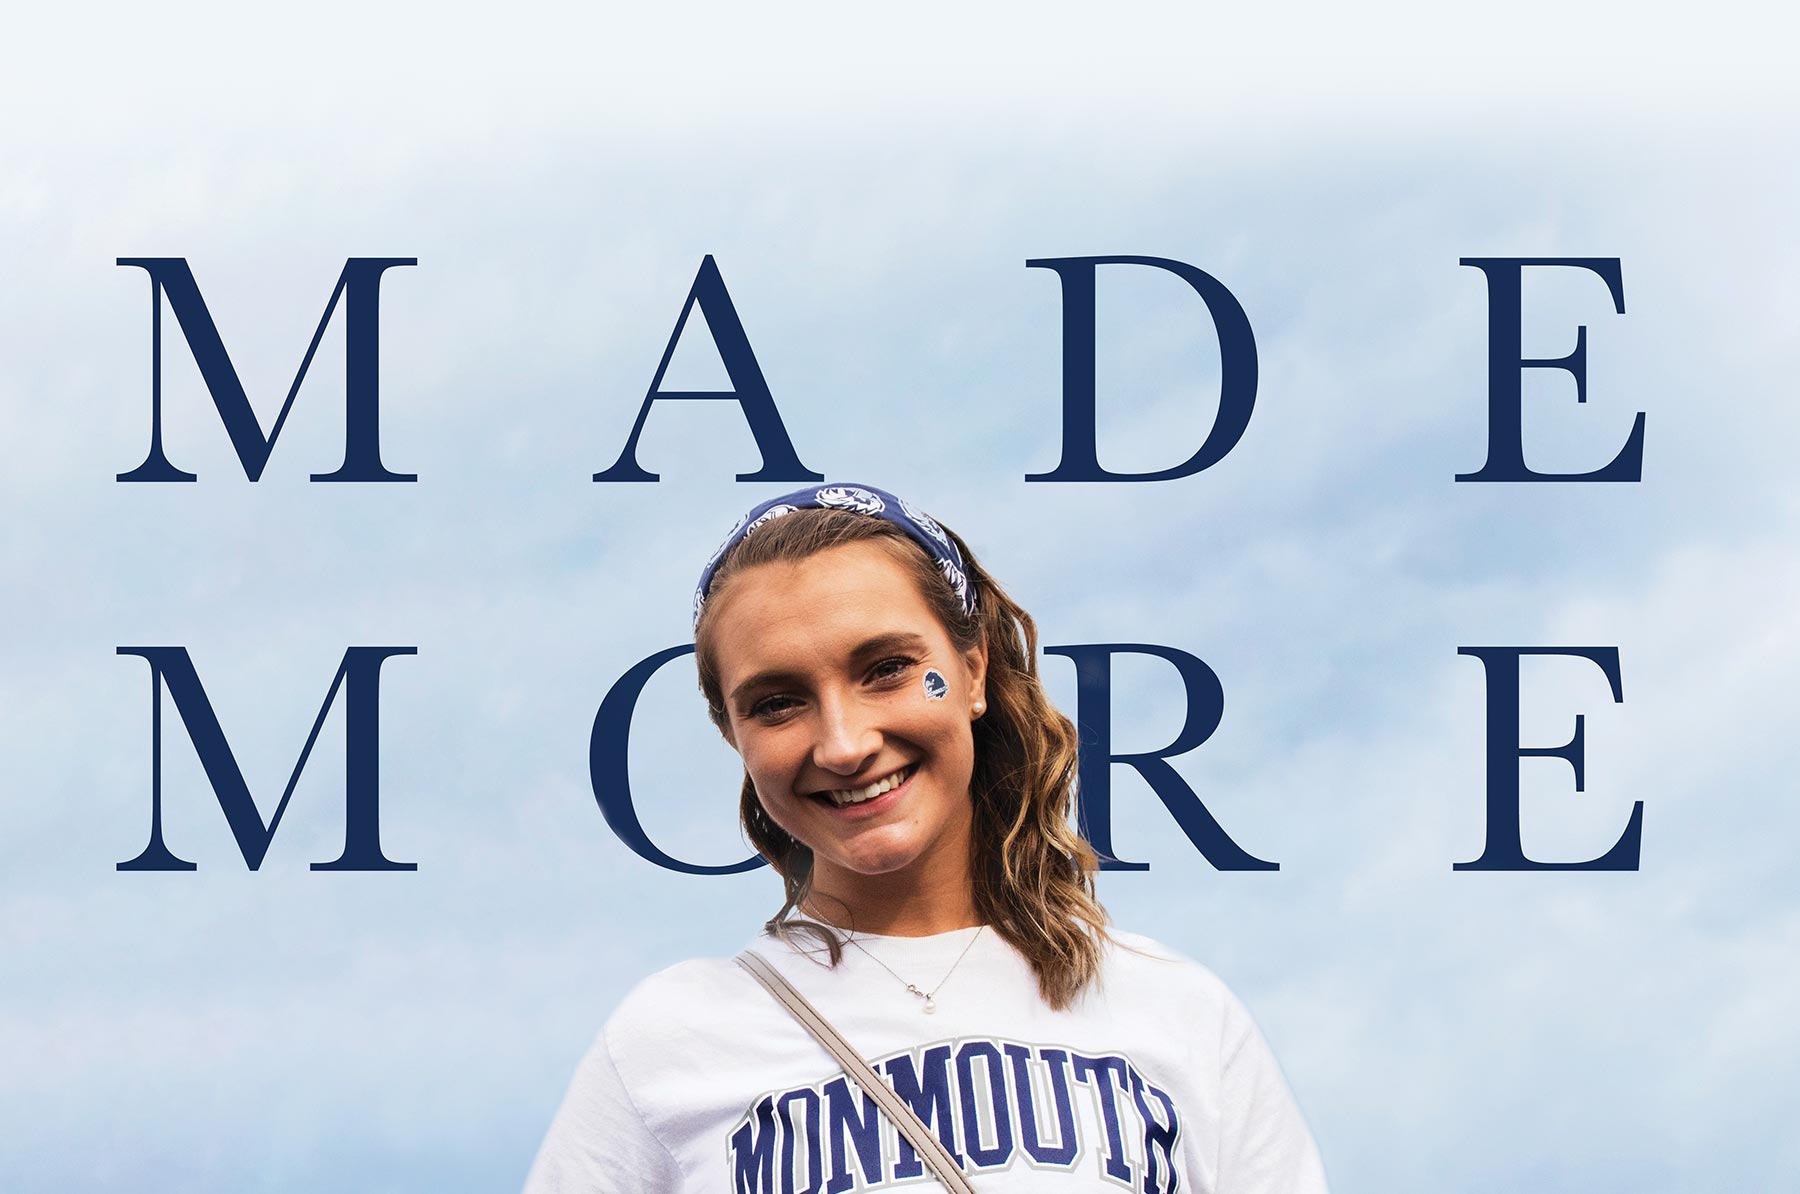 Made More title typography with Student wearning Monmouth shirt and clouds